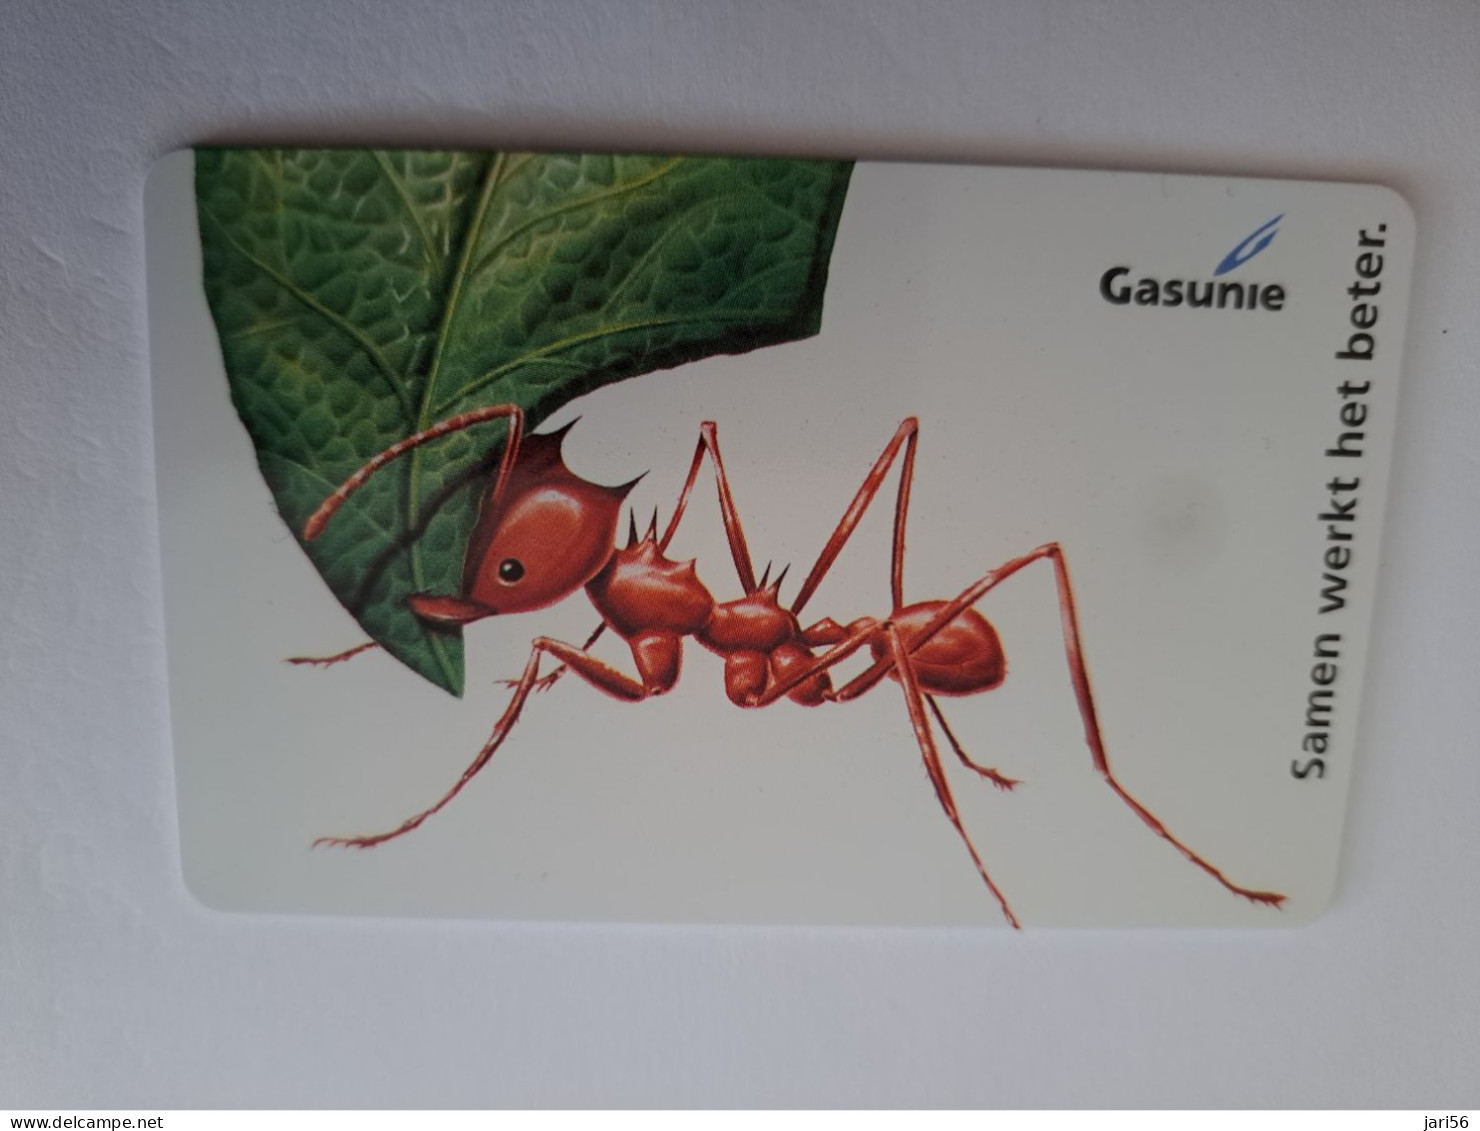 NETHERLANDS / CHIP ADVERTISING CARD/ HFL 7,50  / GASUNIE / ANT ANIMAL   /     CRE 232.03** 14595** - Private